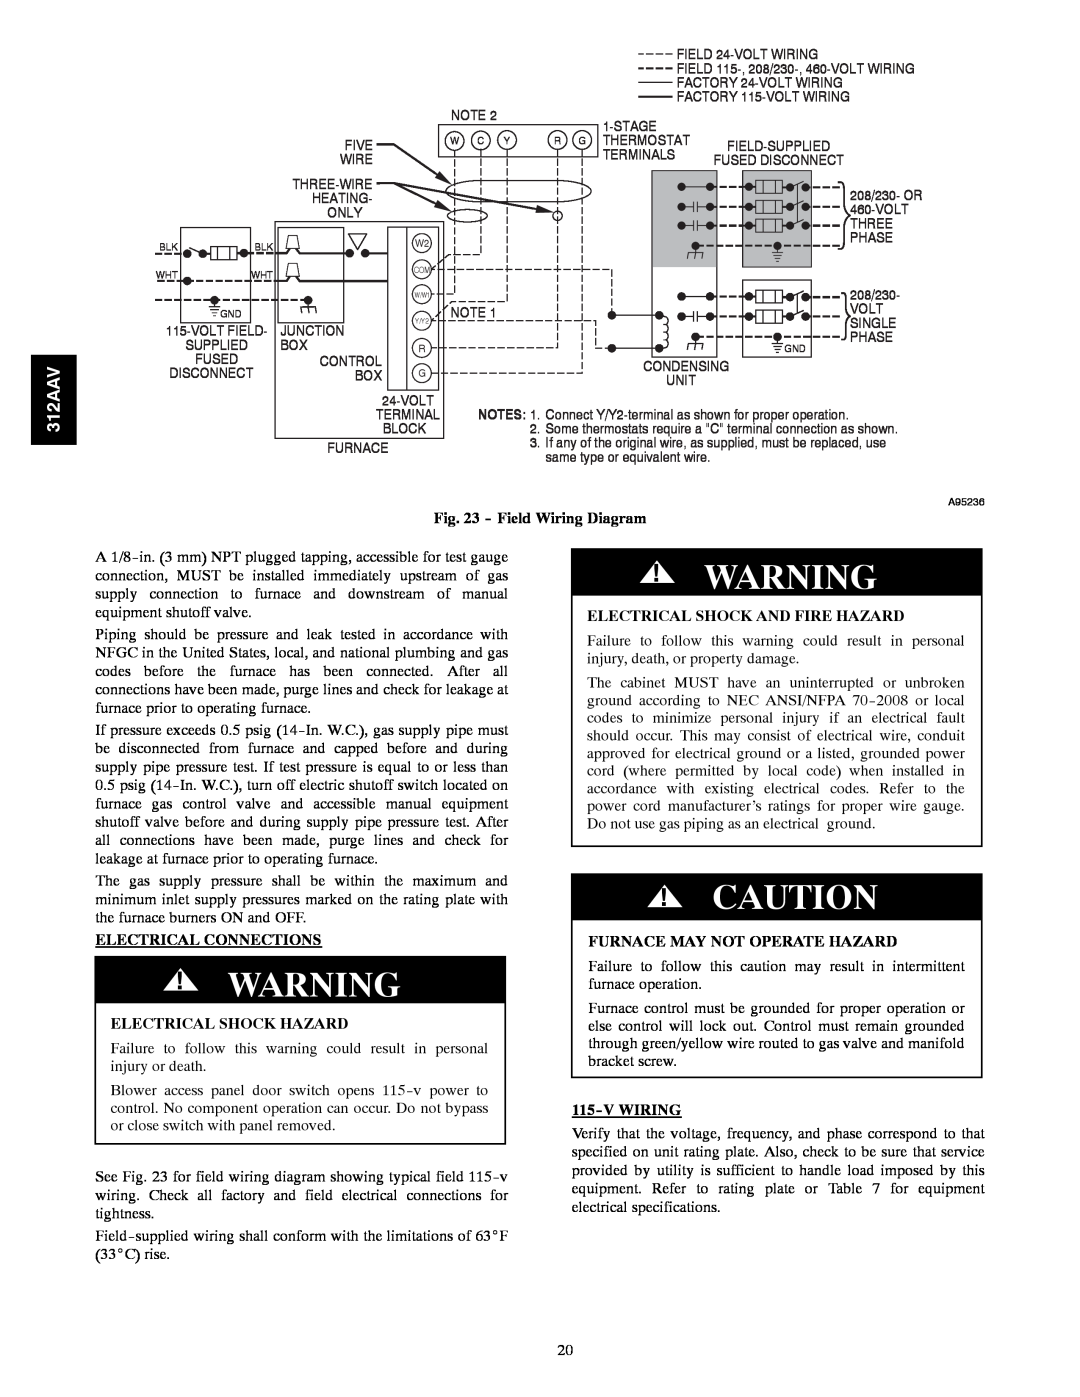 Bryant 312AAV/JAV Field Wiring Diagram, Electrical Shock And Fire Hazard, Electrical Connections, Electrical Shock Hazard 